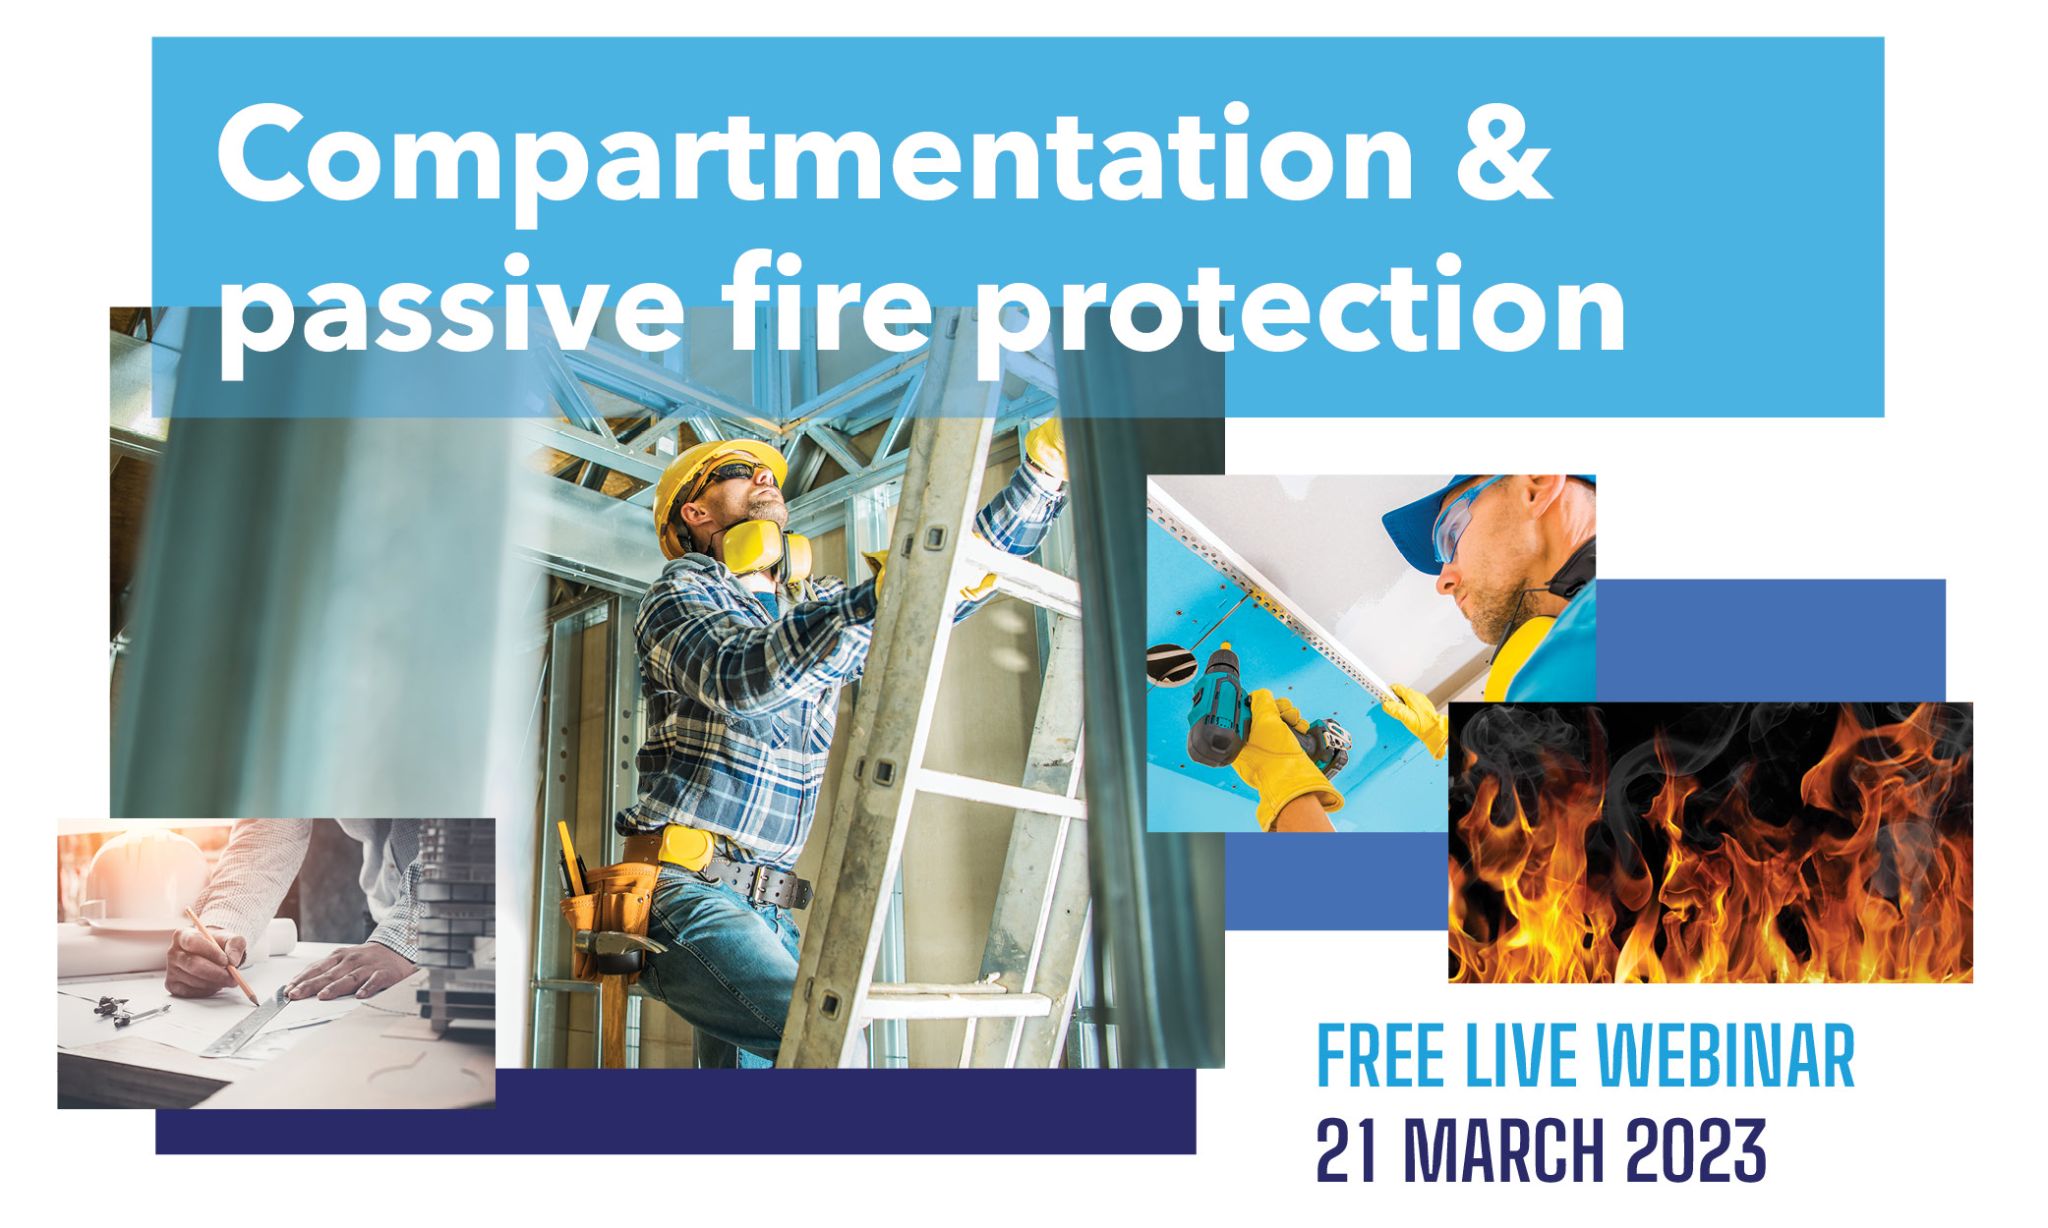 Webinar highlights compartmentation as key to fire safety